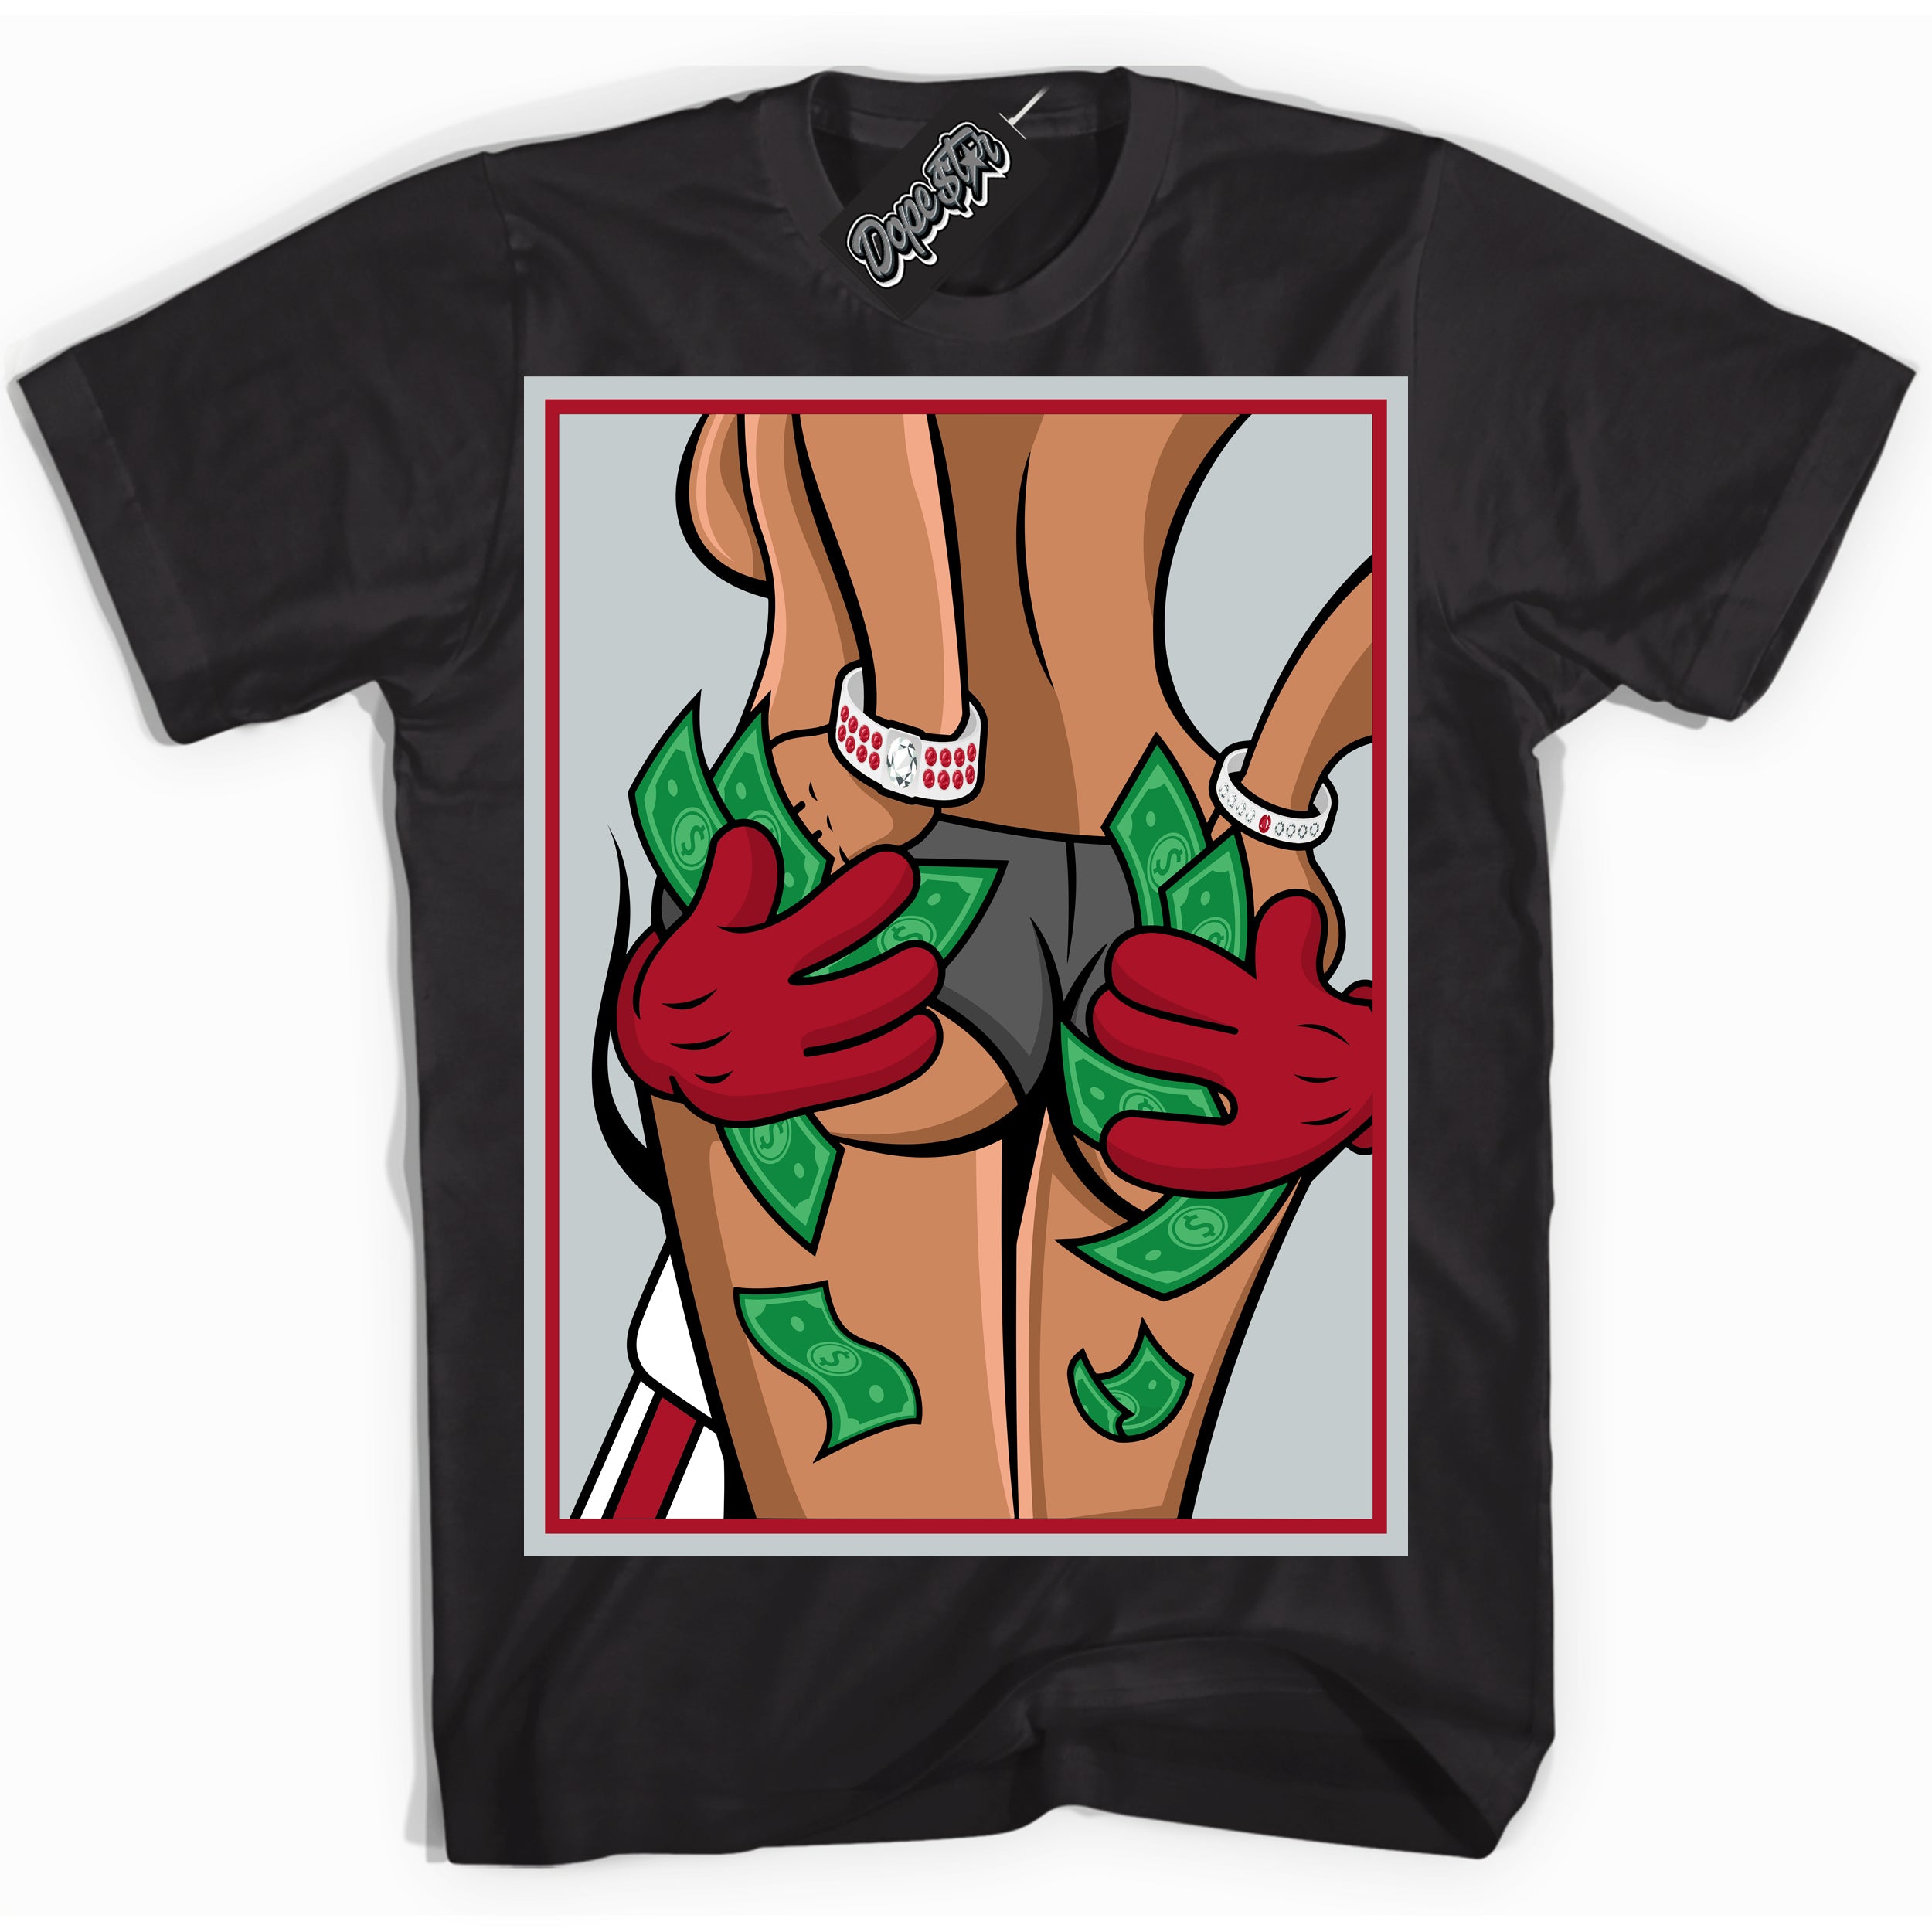 Cool Black Shirt with “ Money Hands” design that perfectly matches Reverse Ultraman Sneakers.